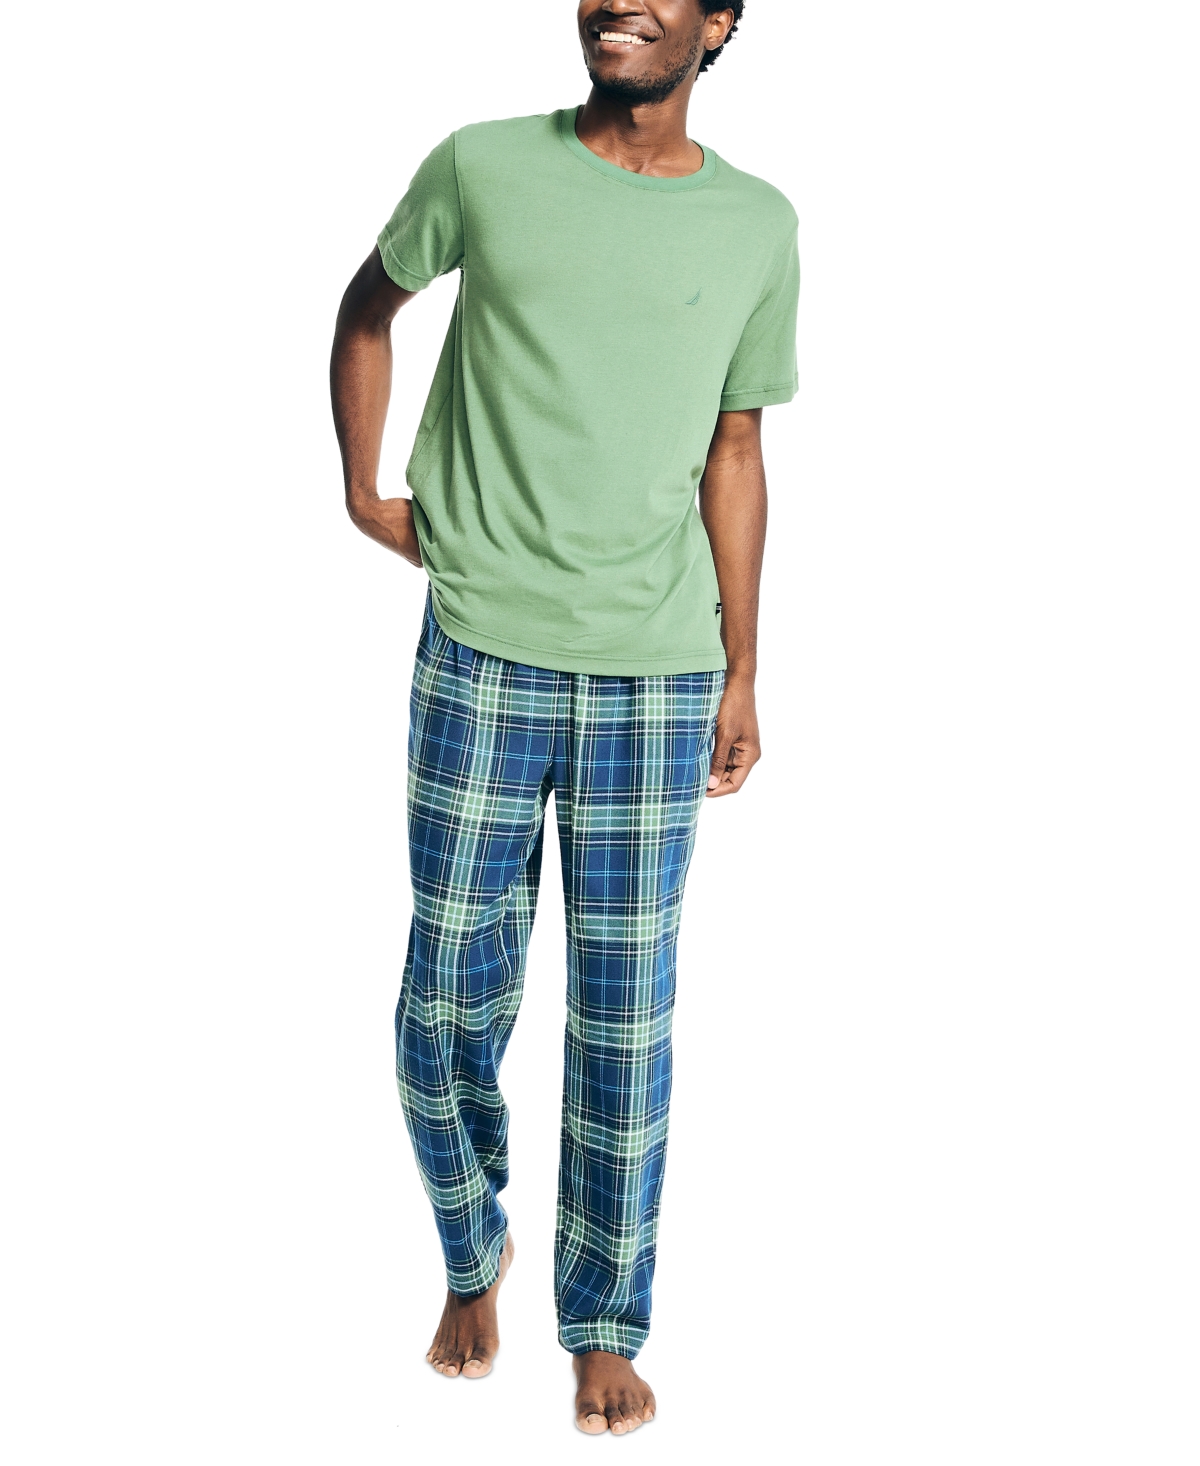 Nautica Men's 2-pc. Classic-fit Solid T-shirt & Plaid Flannel Pajama Pants Set In Seaside Green